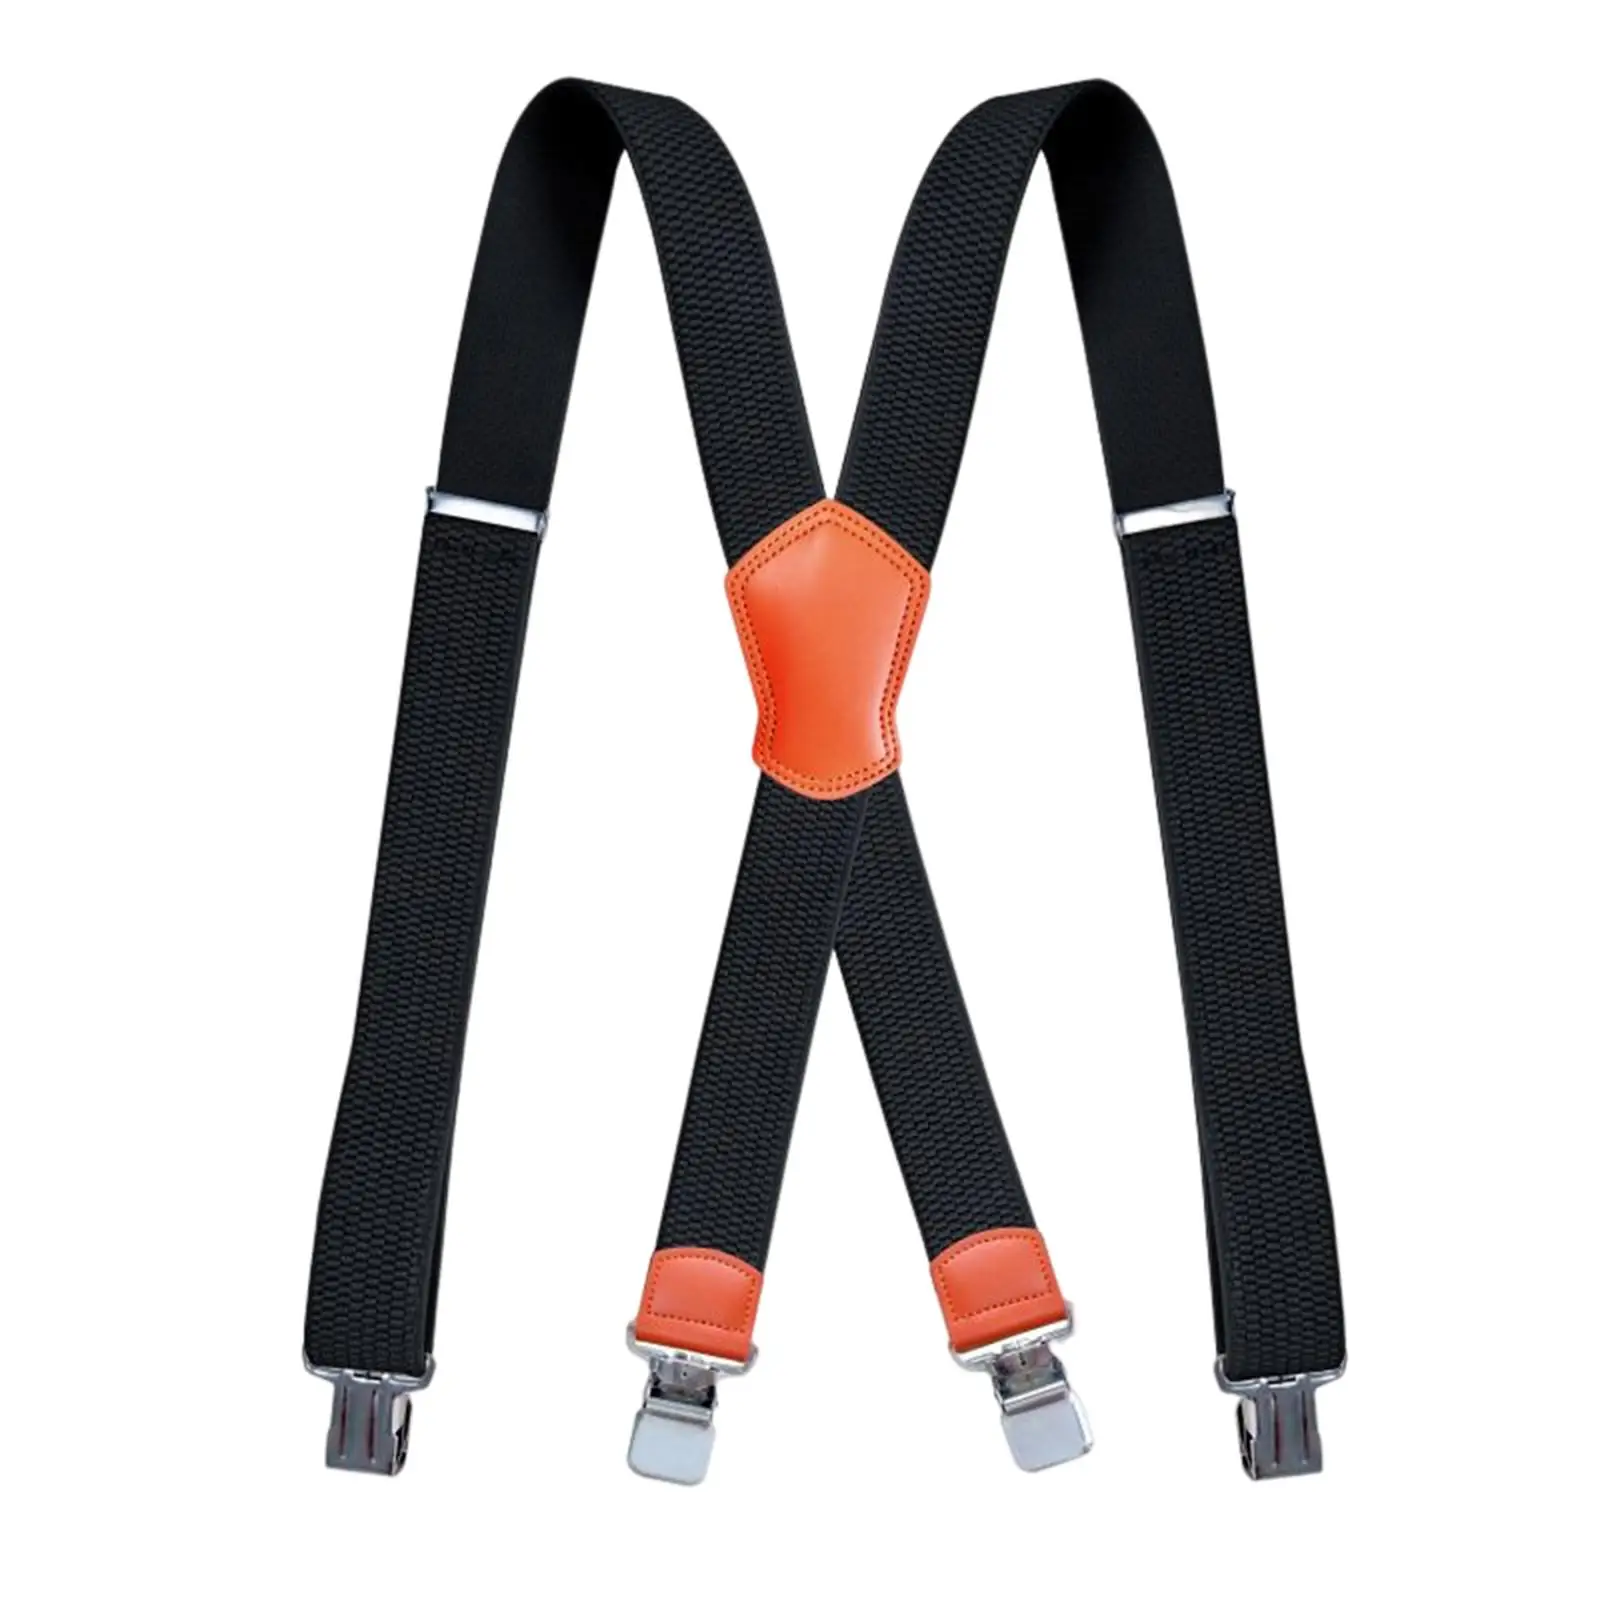 38mm Wide Men Suspenders High Elastic Adjustable Strong Clips Suspender X Shaped Trousers Braces